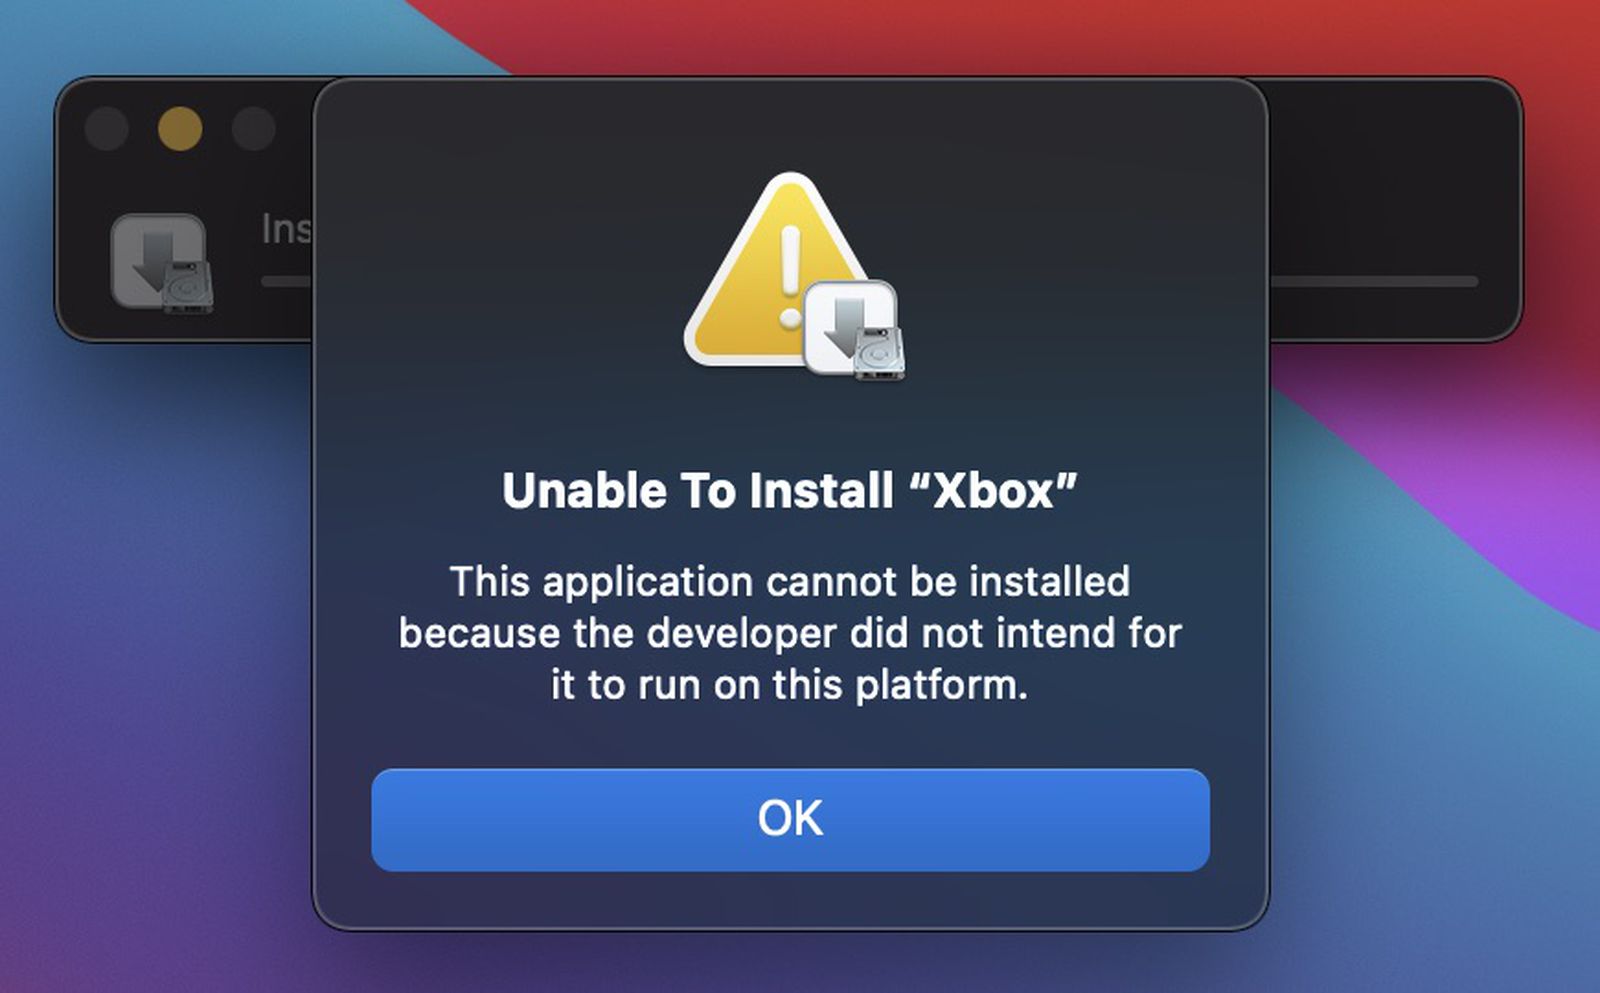 Sideloading iOS apps is no longer possible on M1 Macs